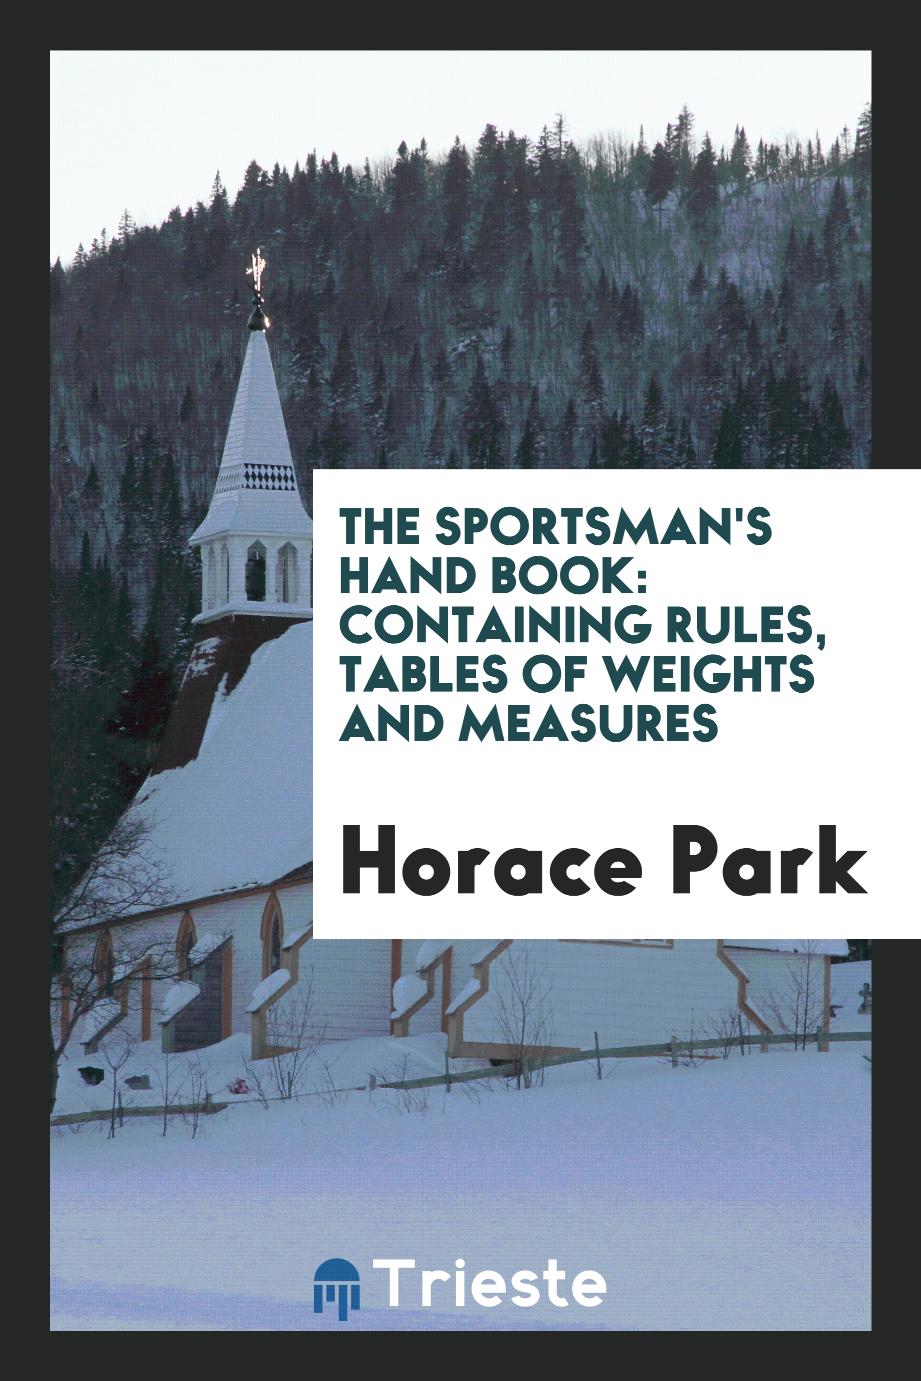 The Sportsman's Hand Book: Containing Rules, Tables of Weights and Measures